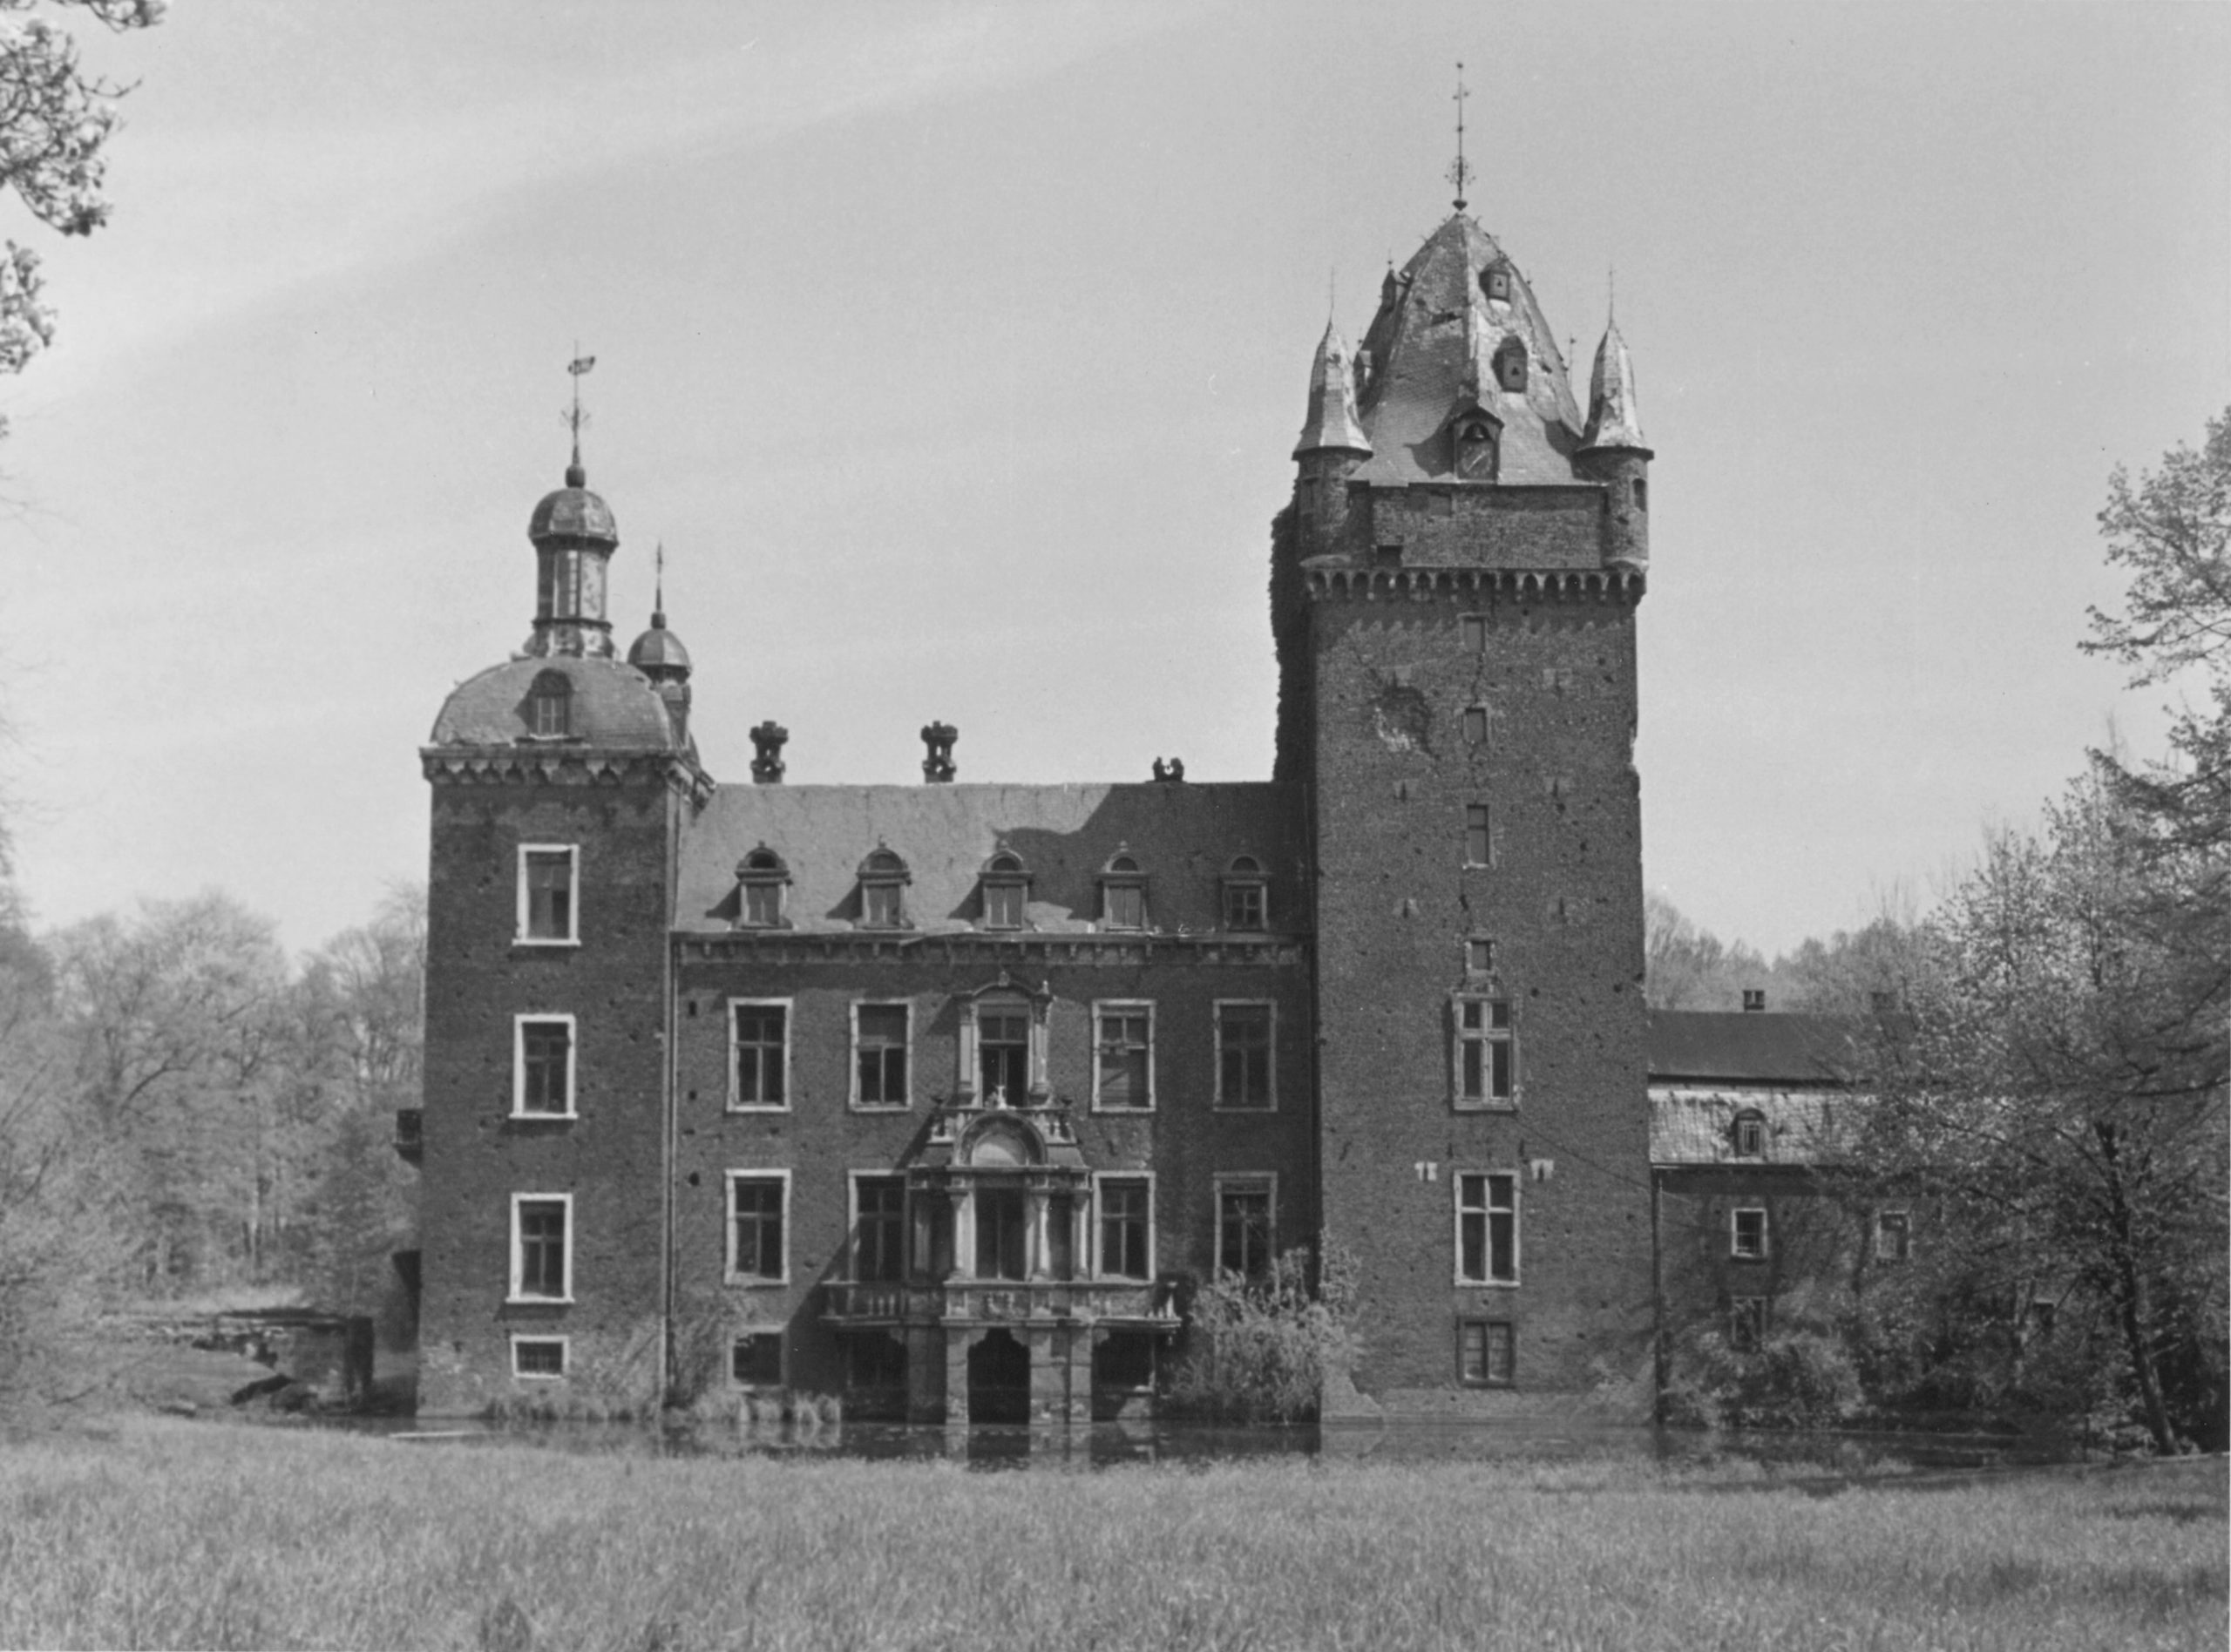 Black and white image of dilapidated German castle (Schloss Harff)